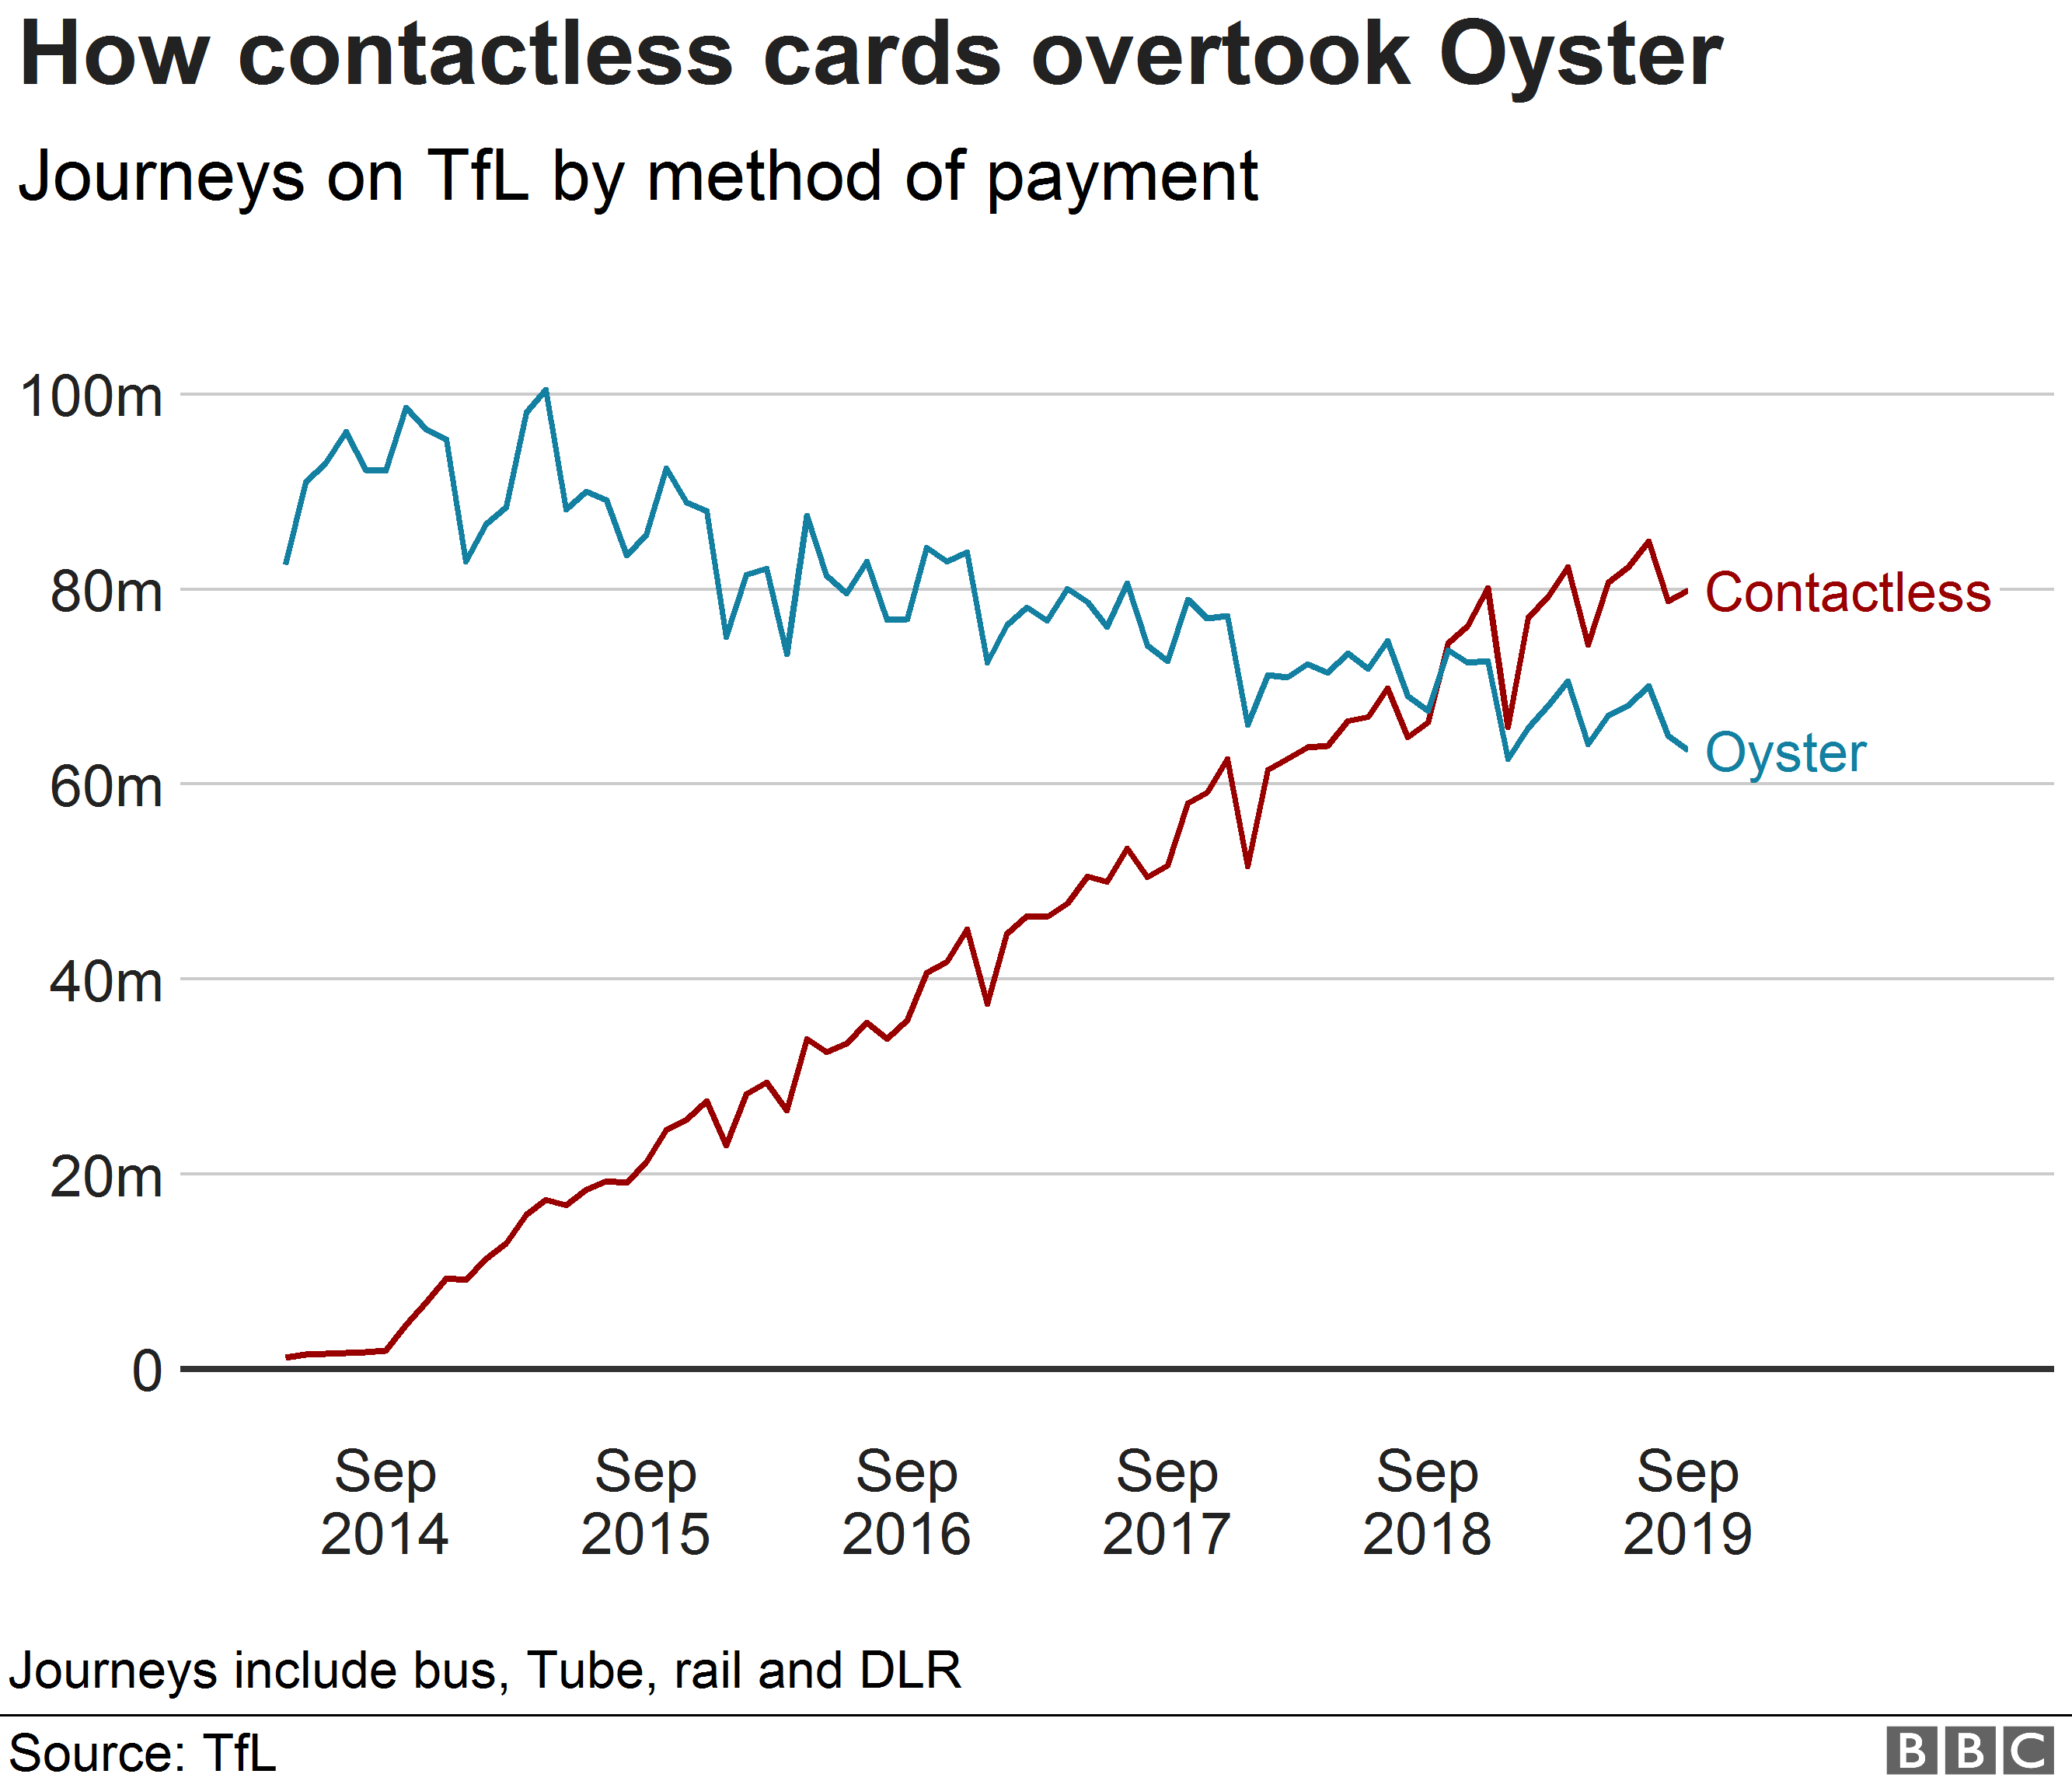 Chart showing the growth of contactless and decline of Oyster